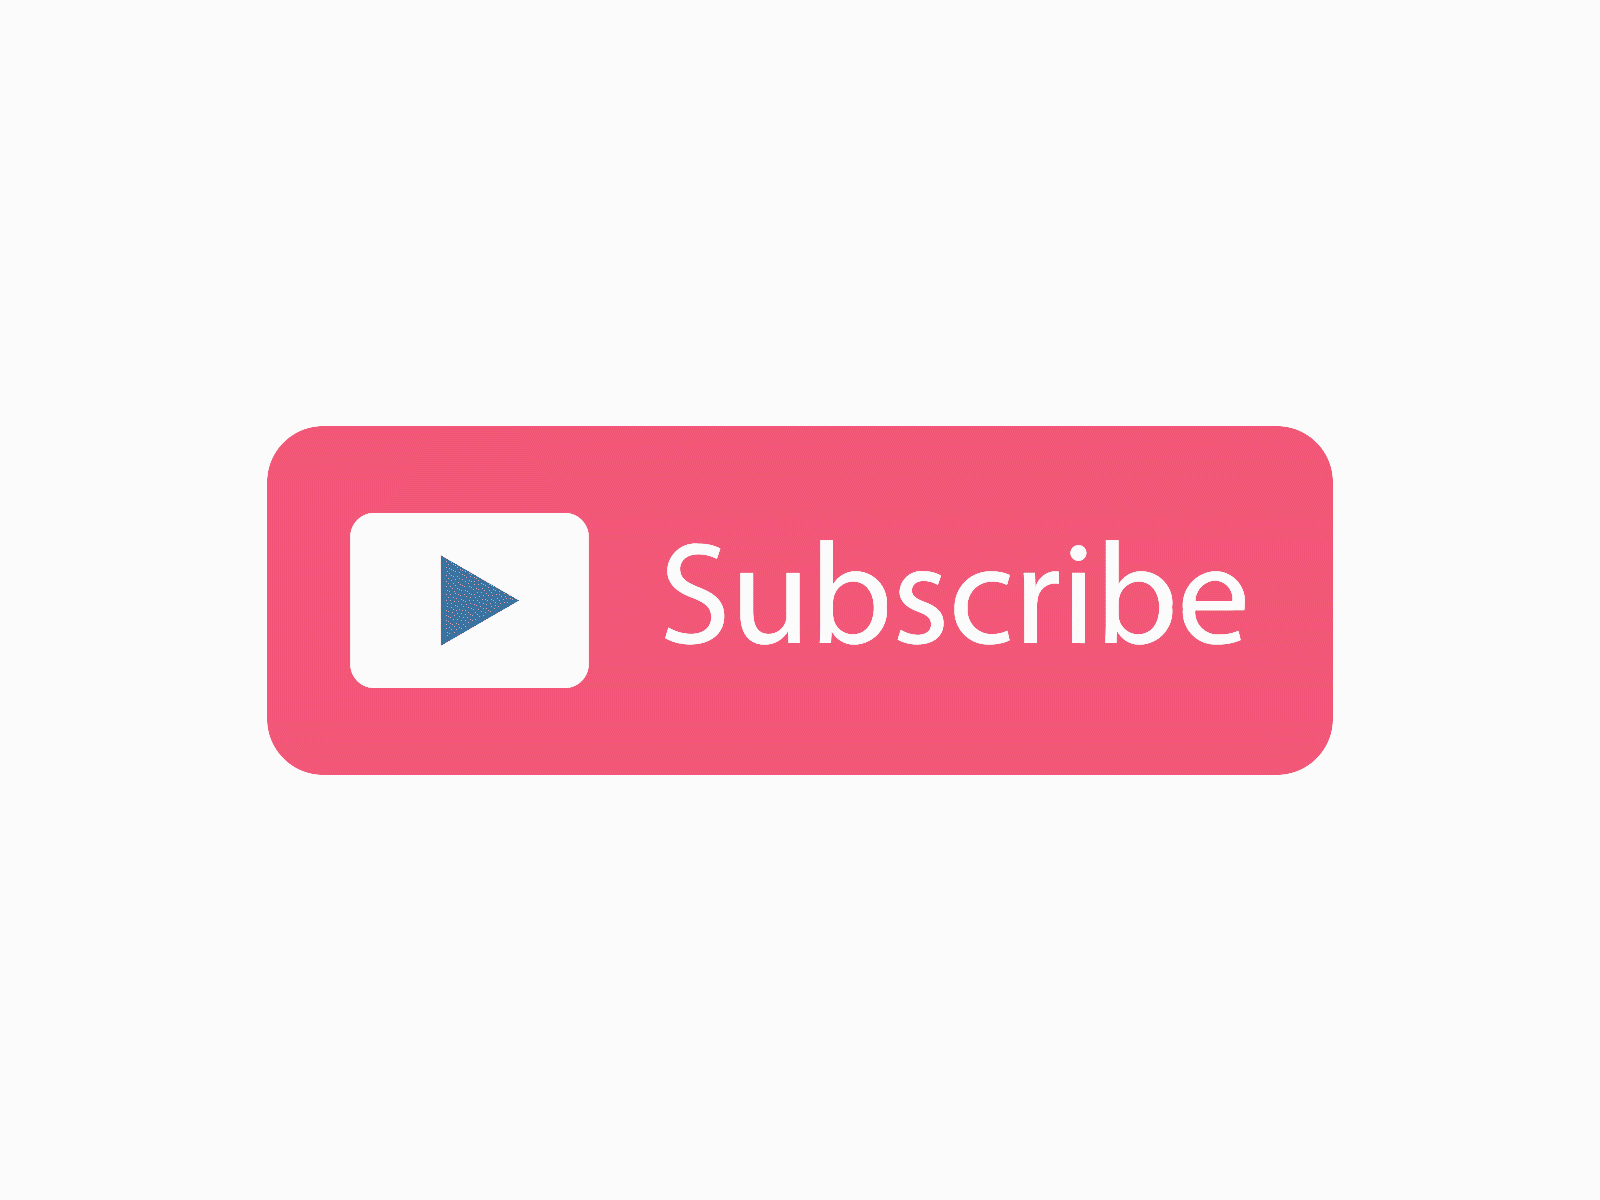 YouTube Subscribe Animated Icon Free Download AlfredoCreates